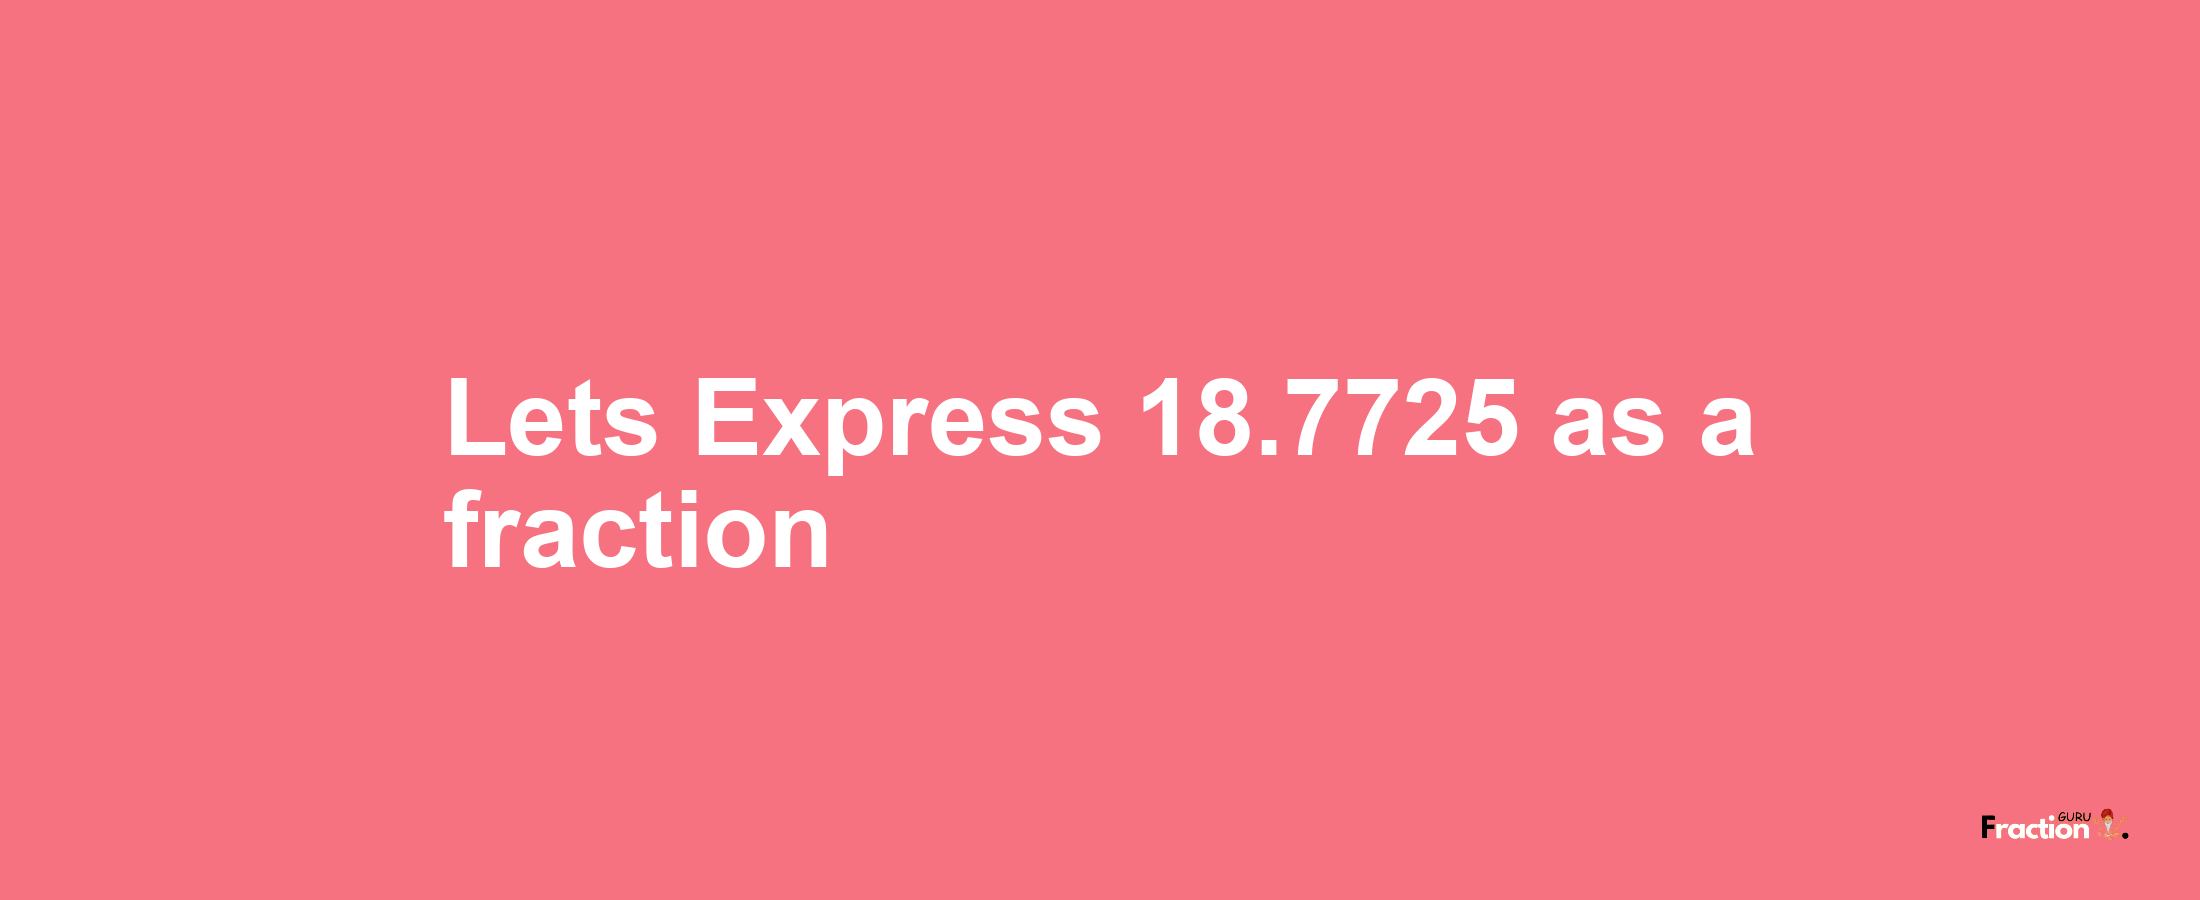 Lets Express 18.7725 as afraction